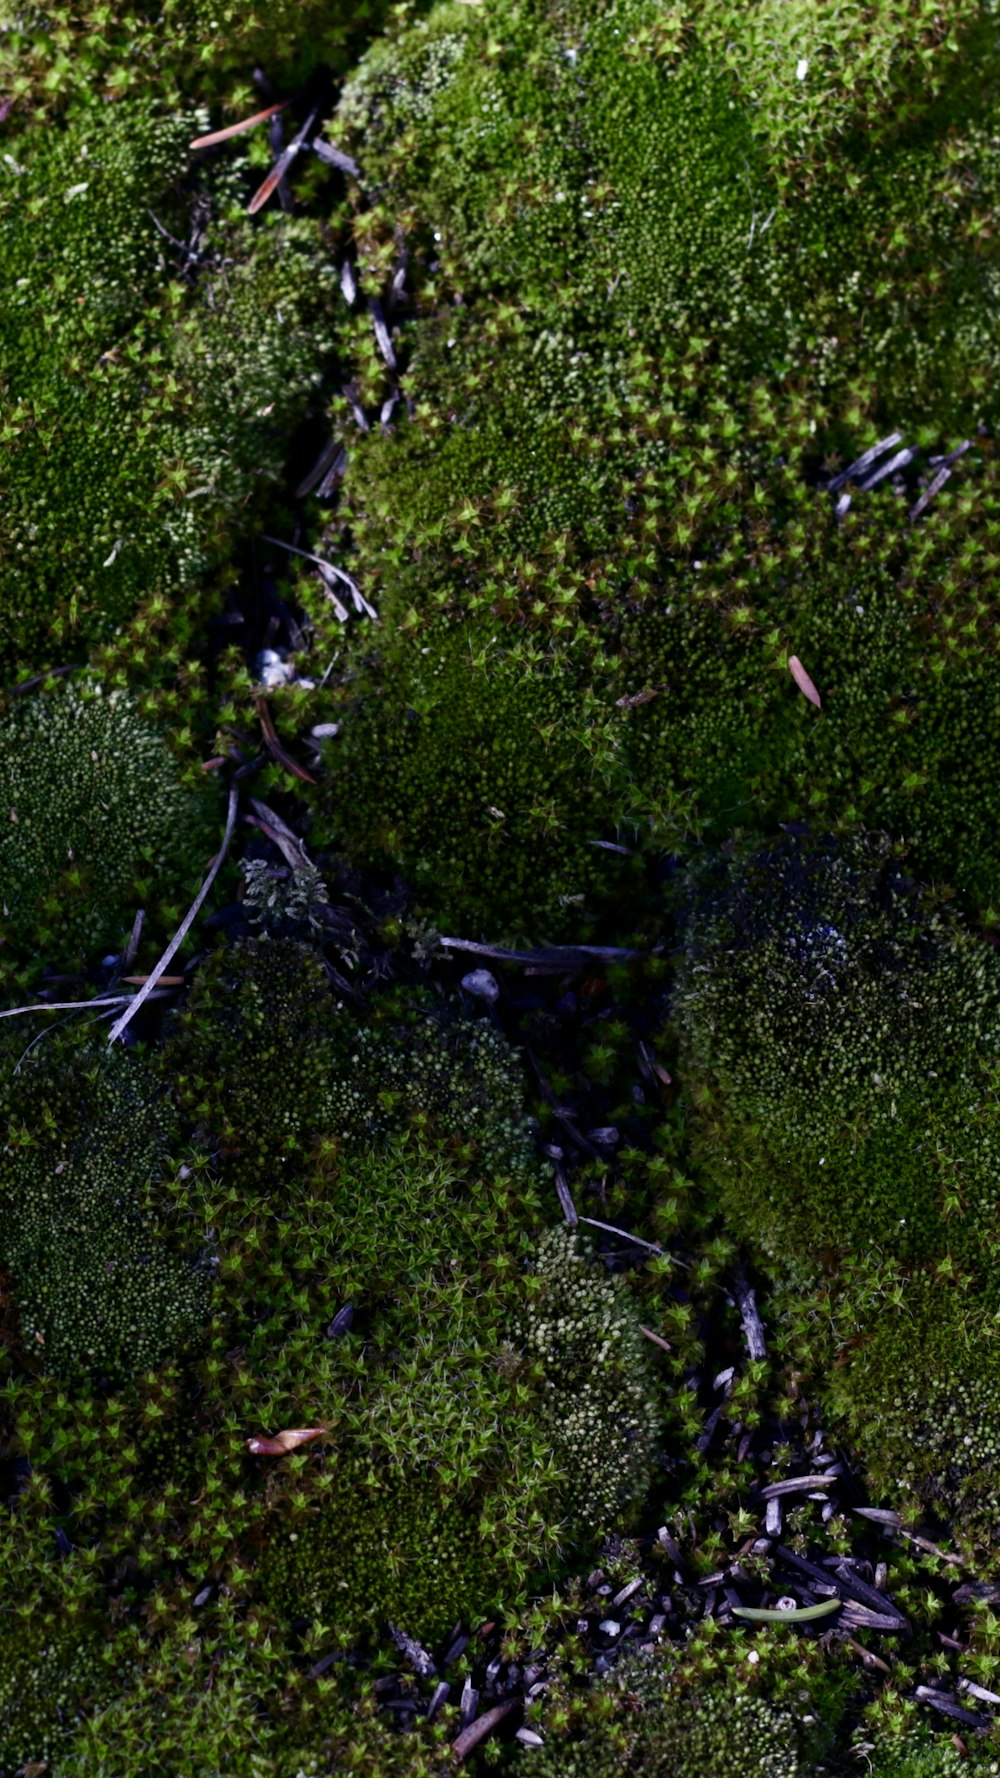 a close-up of some moss